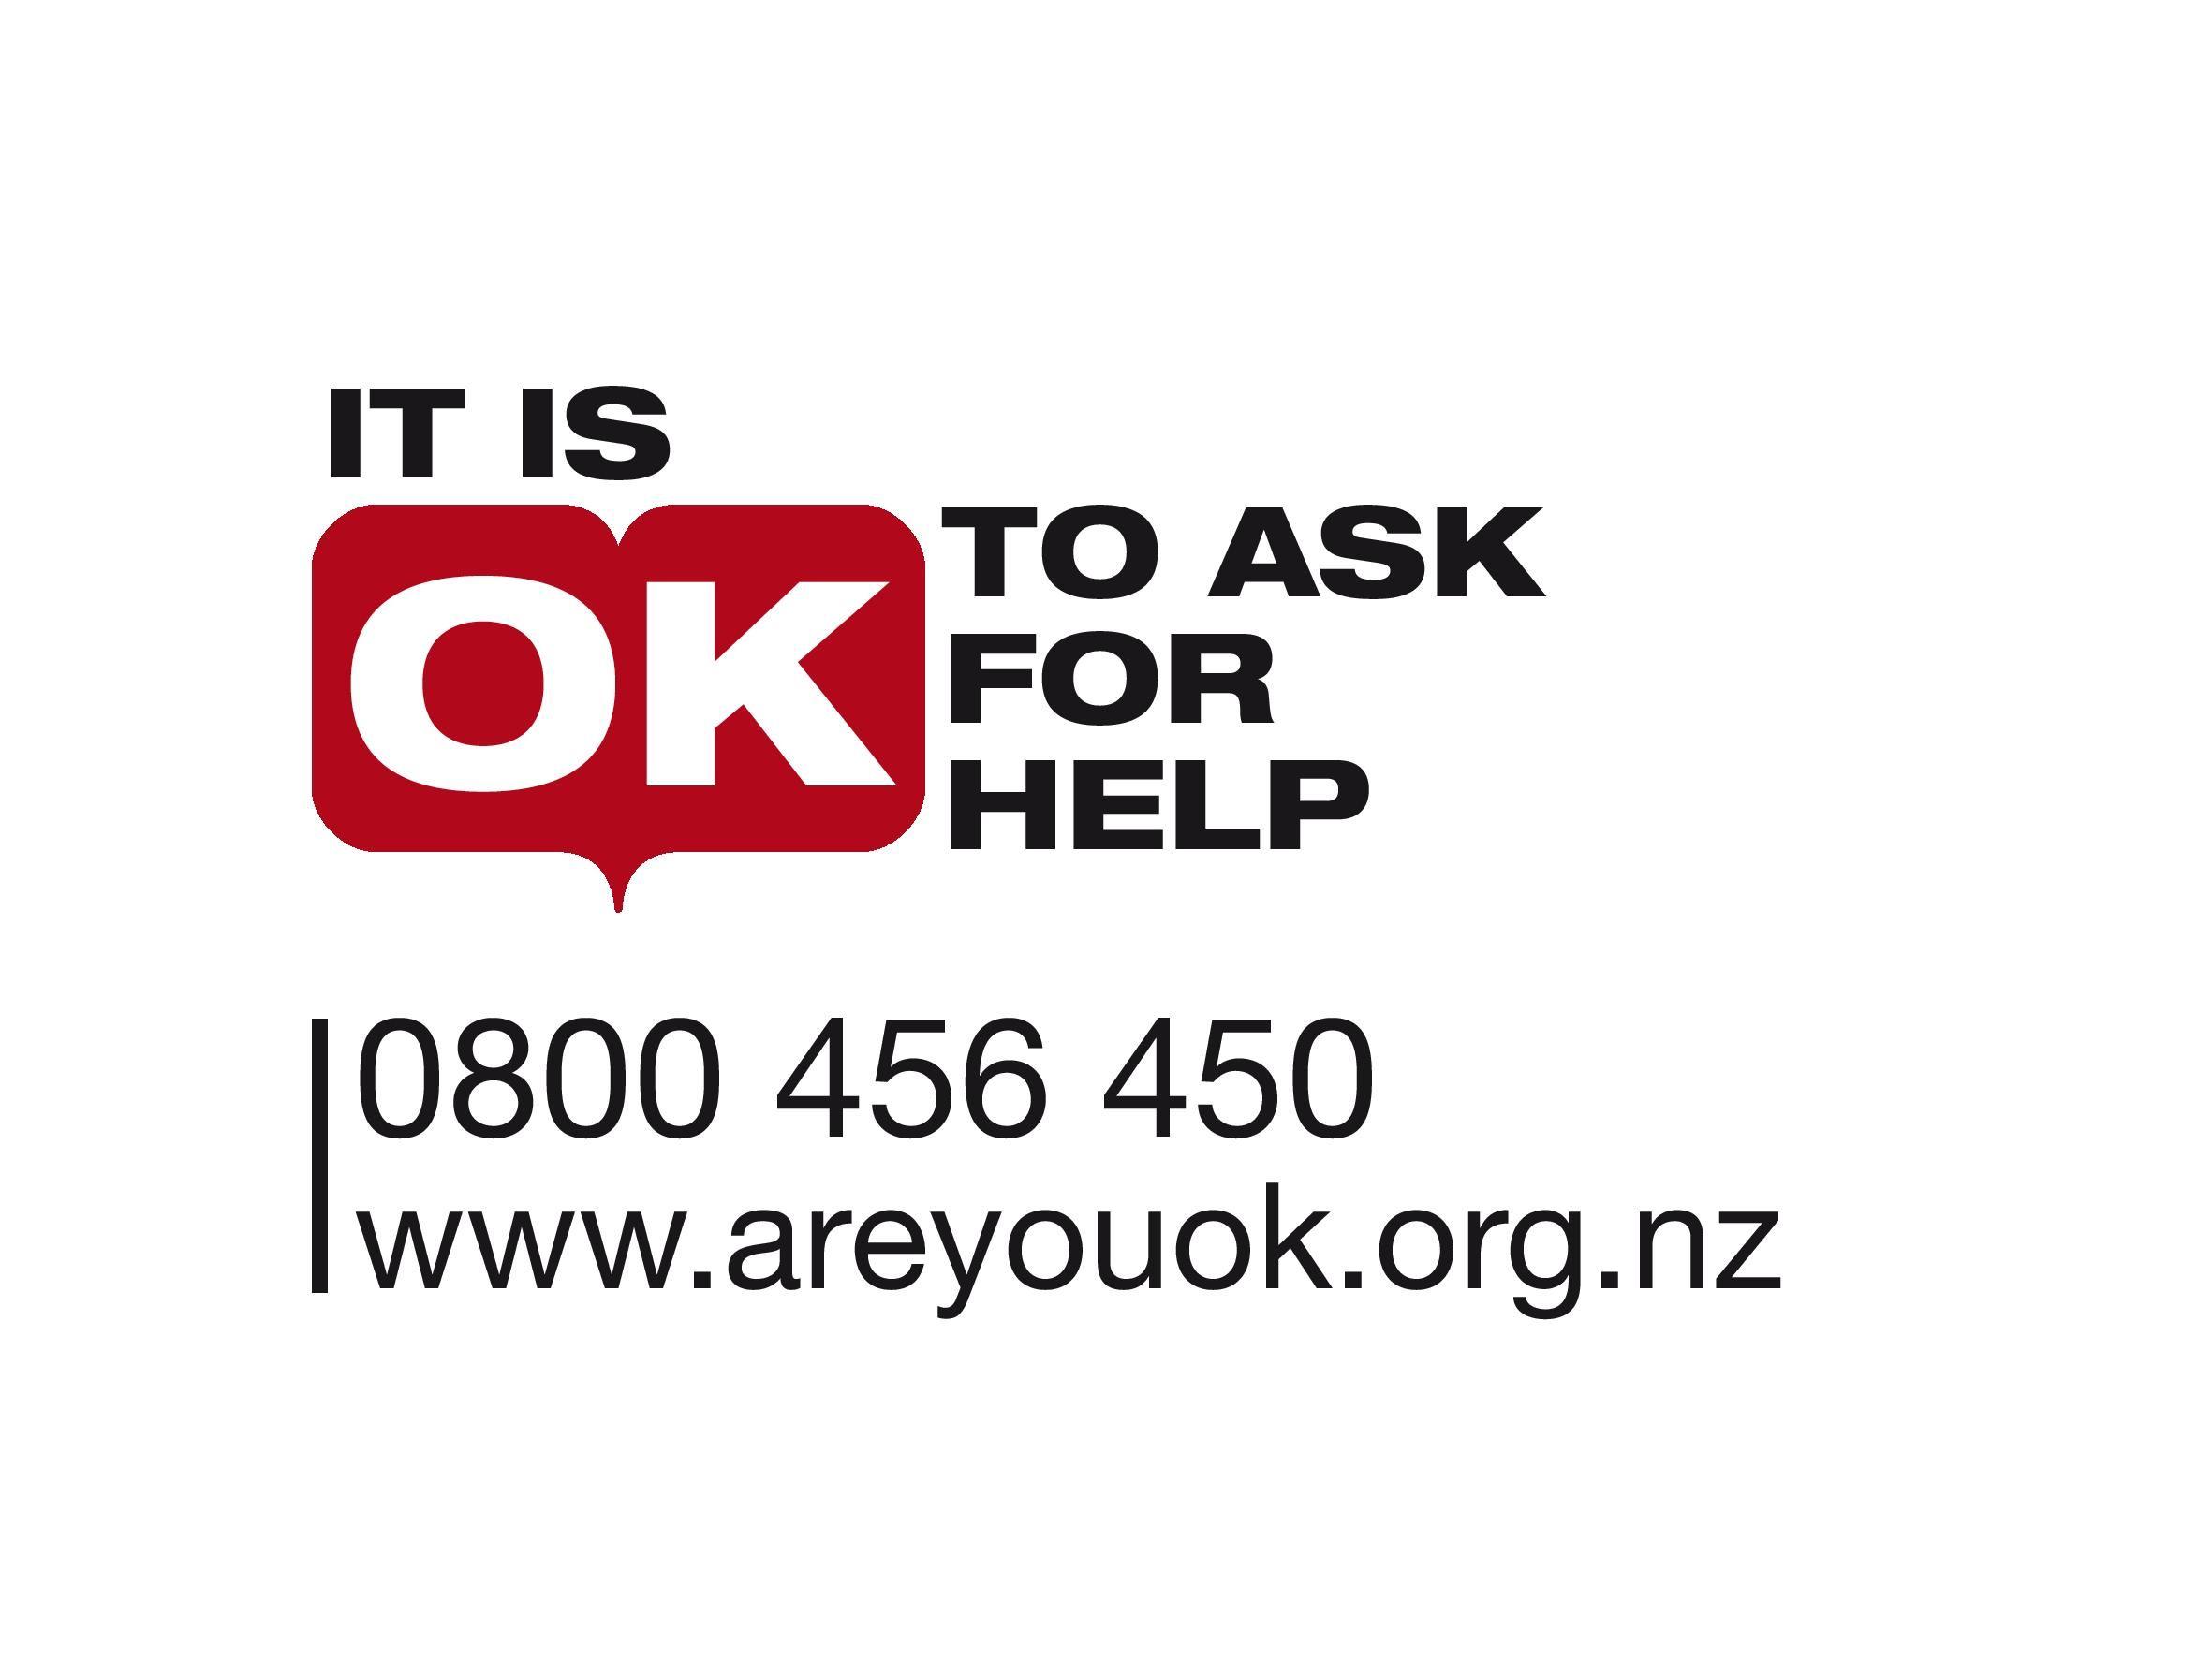 Ask Logo - It is OK to ask for help logo - with phone number | It's Not OK